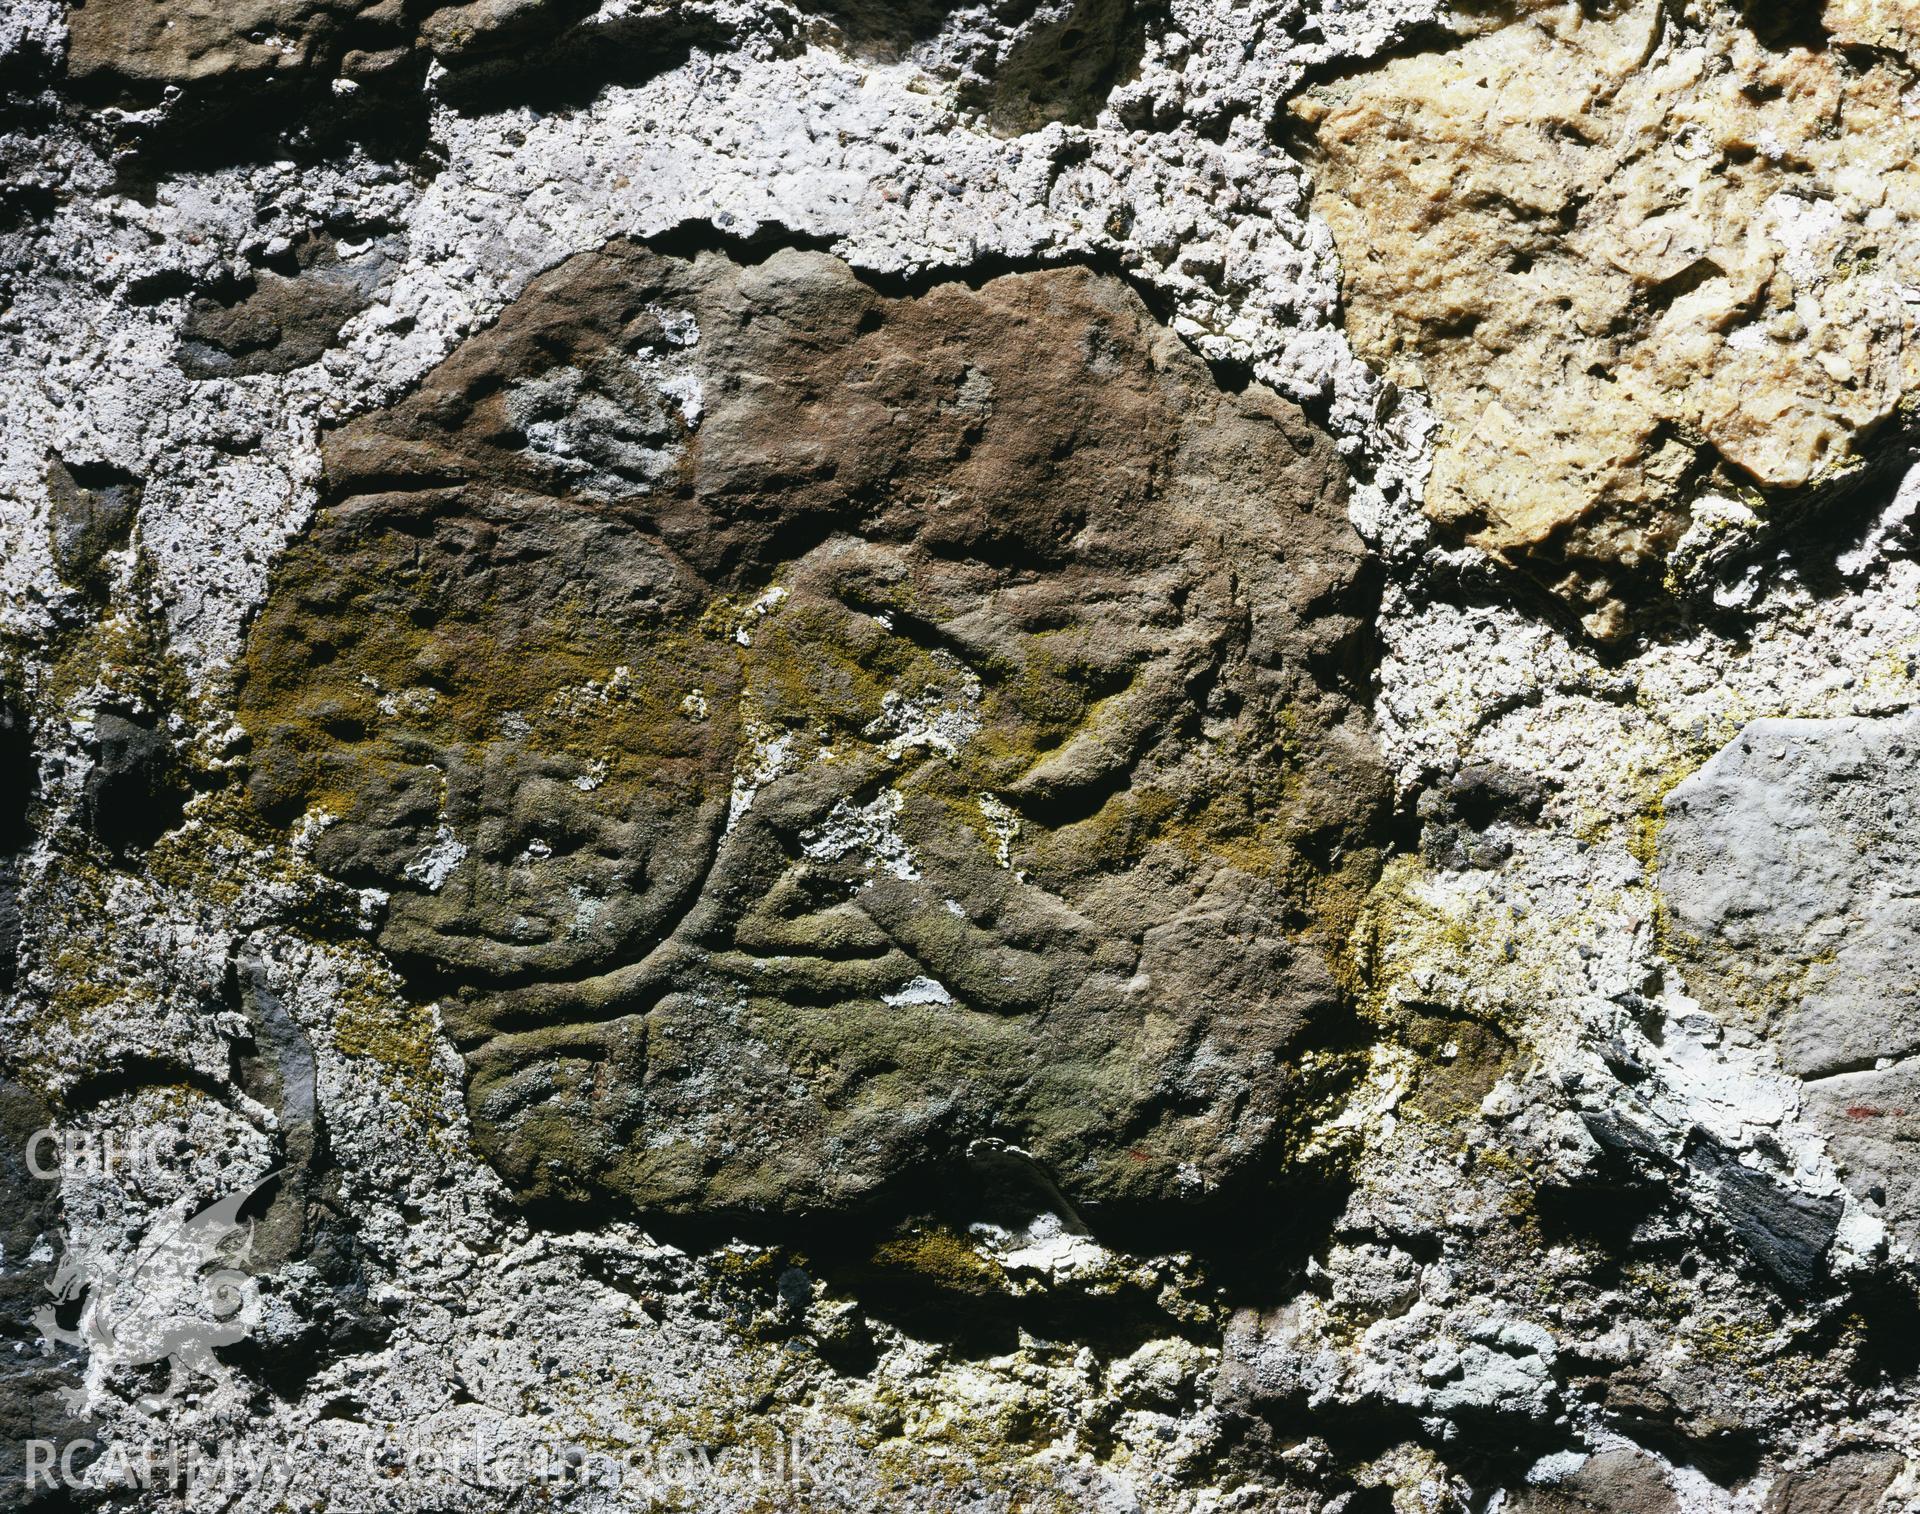 RCAHMW colour transparency showing early Christian stone at St Ishmael's Church, Camrose, taken by I.N. Wright, 2002